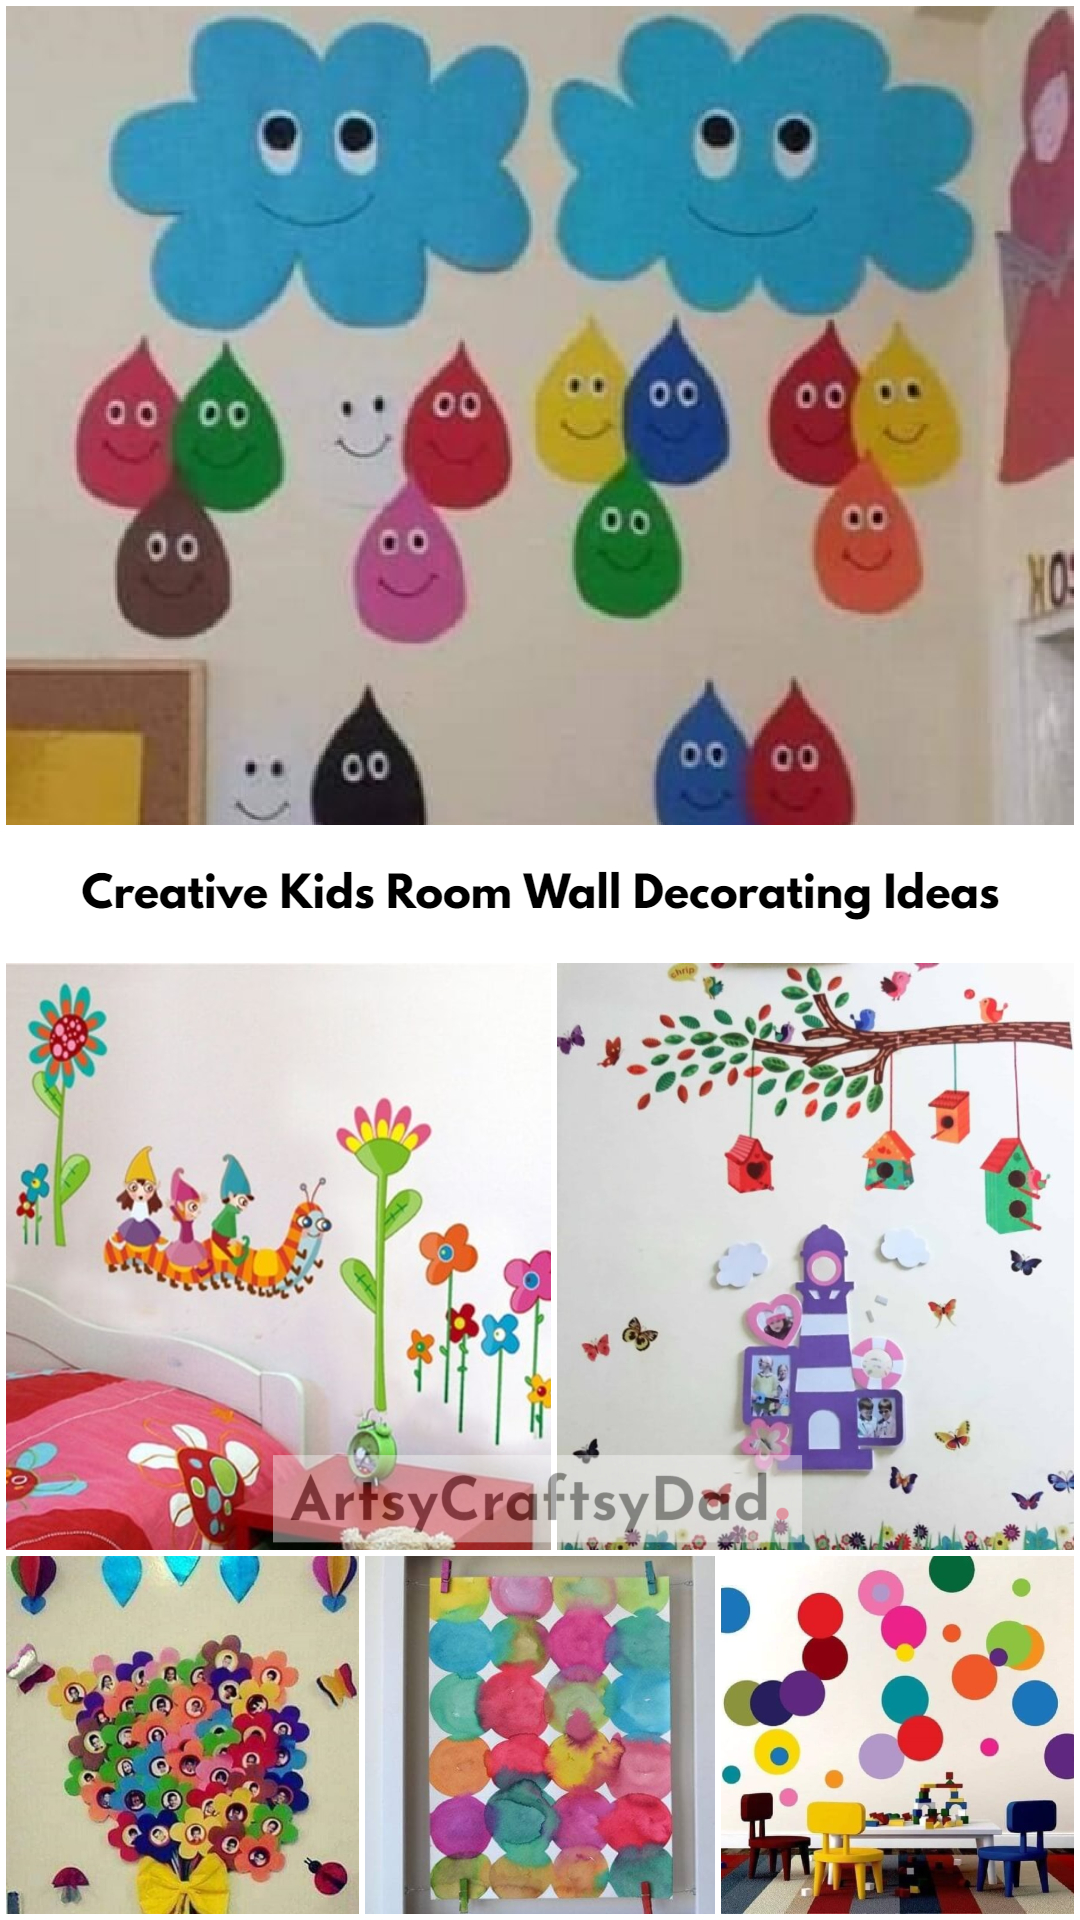 Creative Kids Room Wall Decorating Ideas Using Recycled Materials